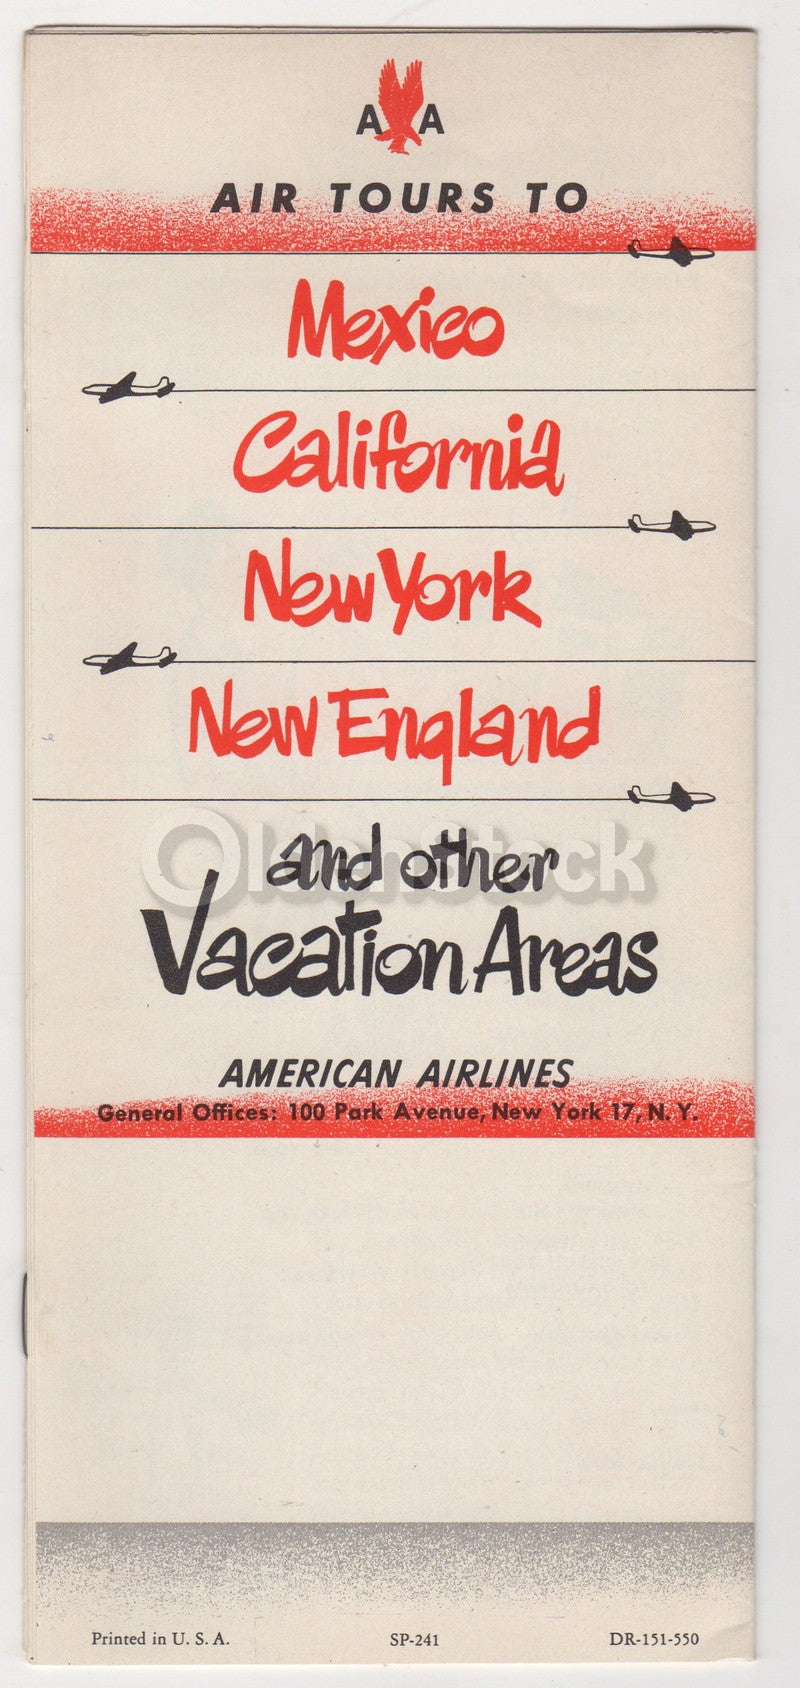 American Airlines Mexico California Vacations Vintage Advertising Brochure